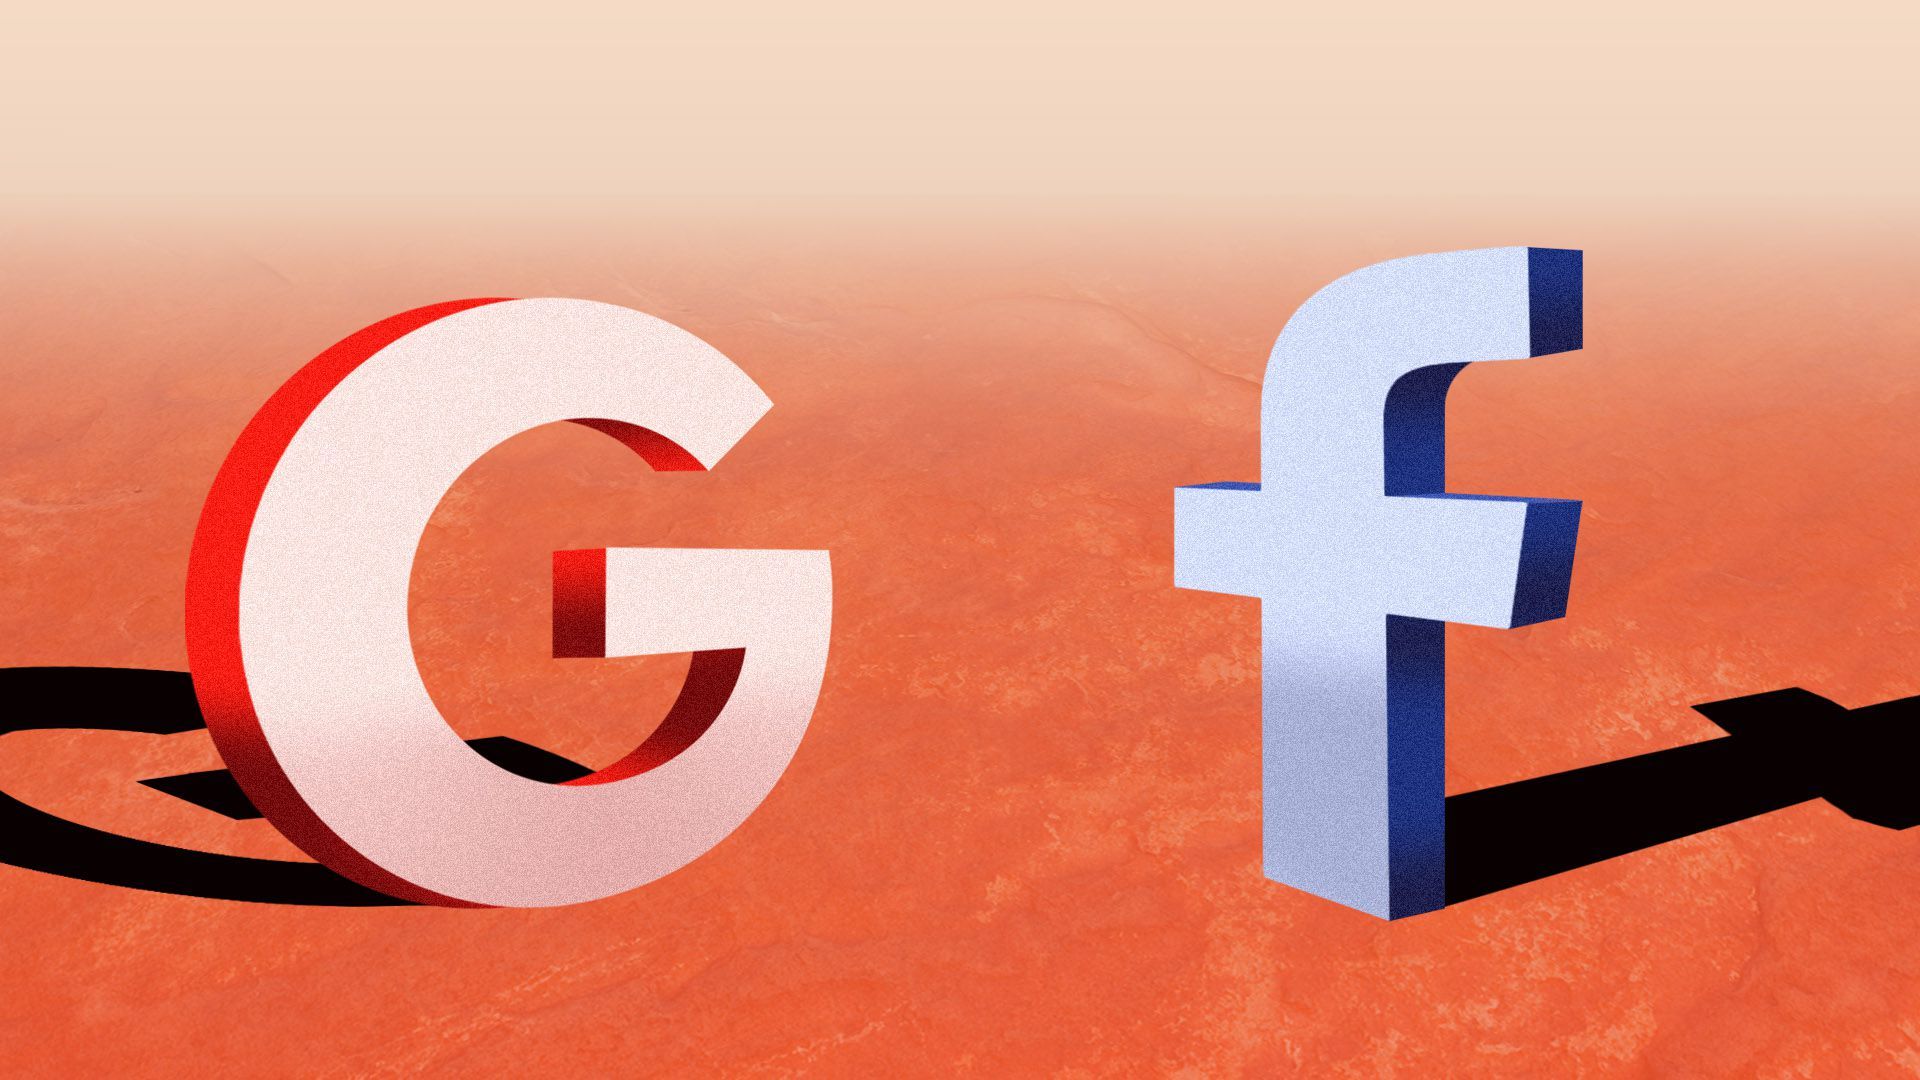 Illustration of the Google and Facebook logos facing off on an Australian-outback-like-landscape